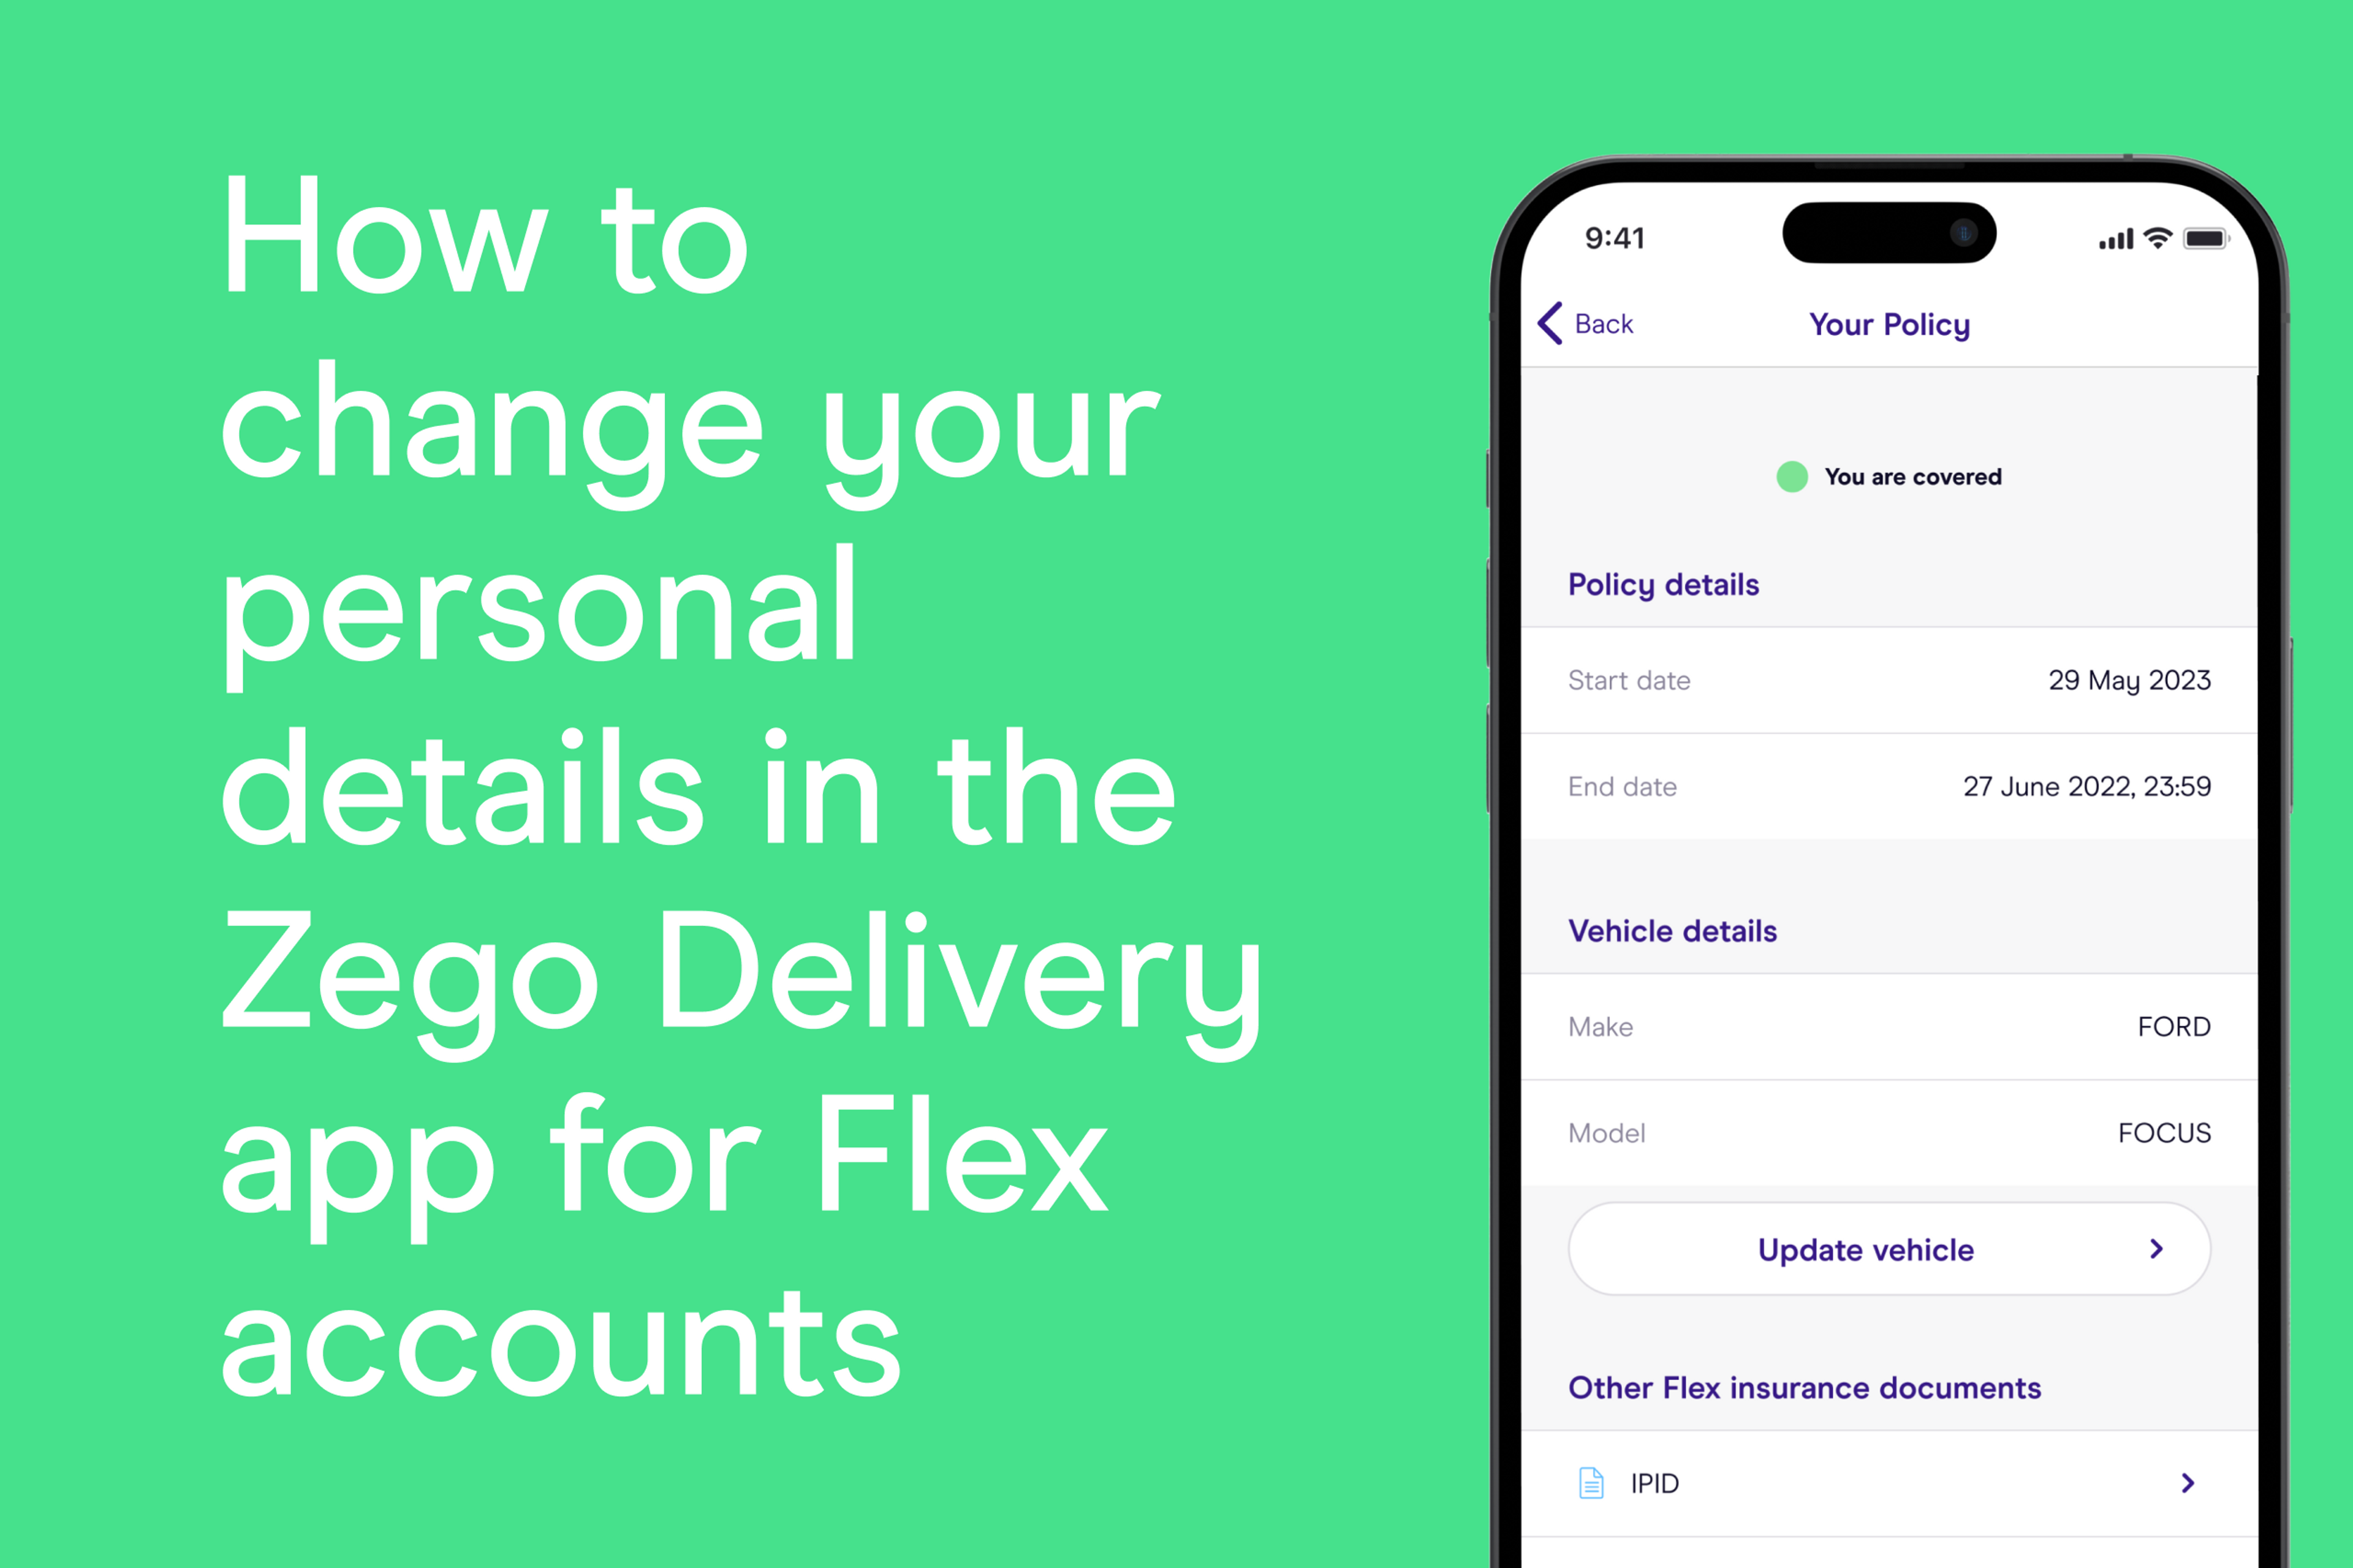 How to change your personal details in the Zego Delivery app